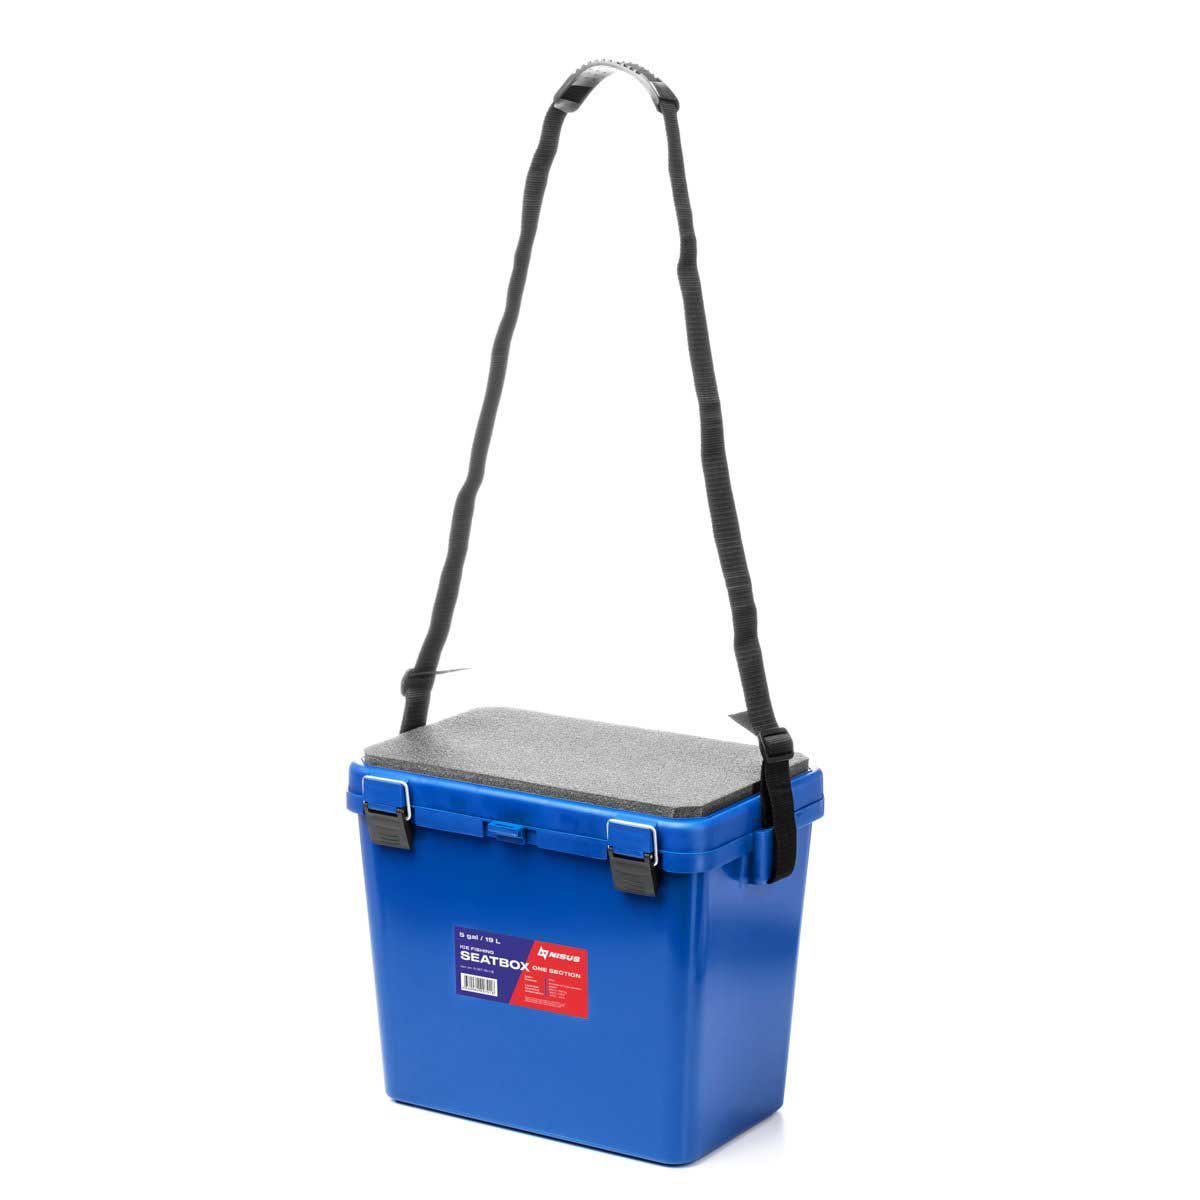 Ice Fishing Bucket Type Box with Seat and Adjustable Shoulder Strap, 5 gal, blue